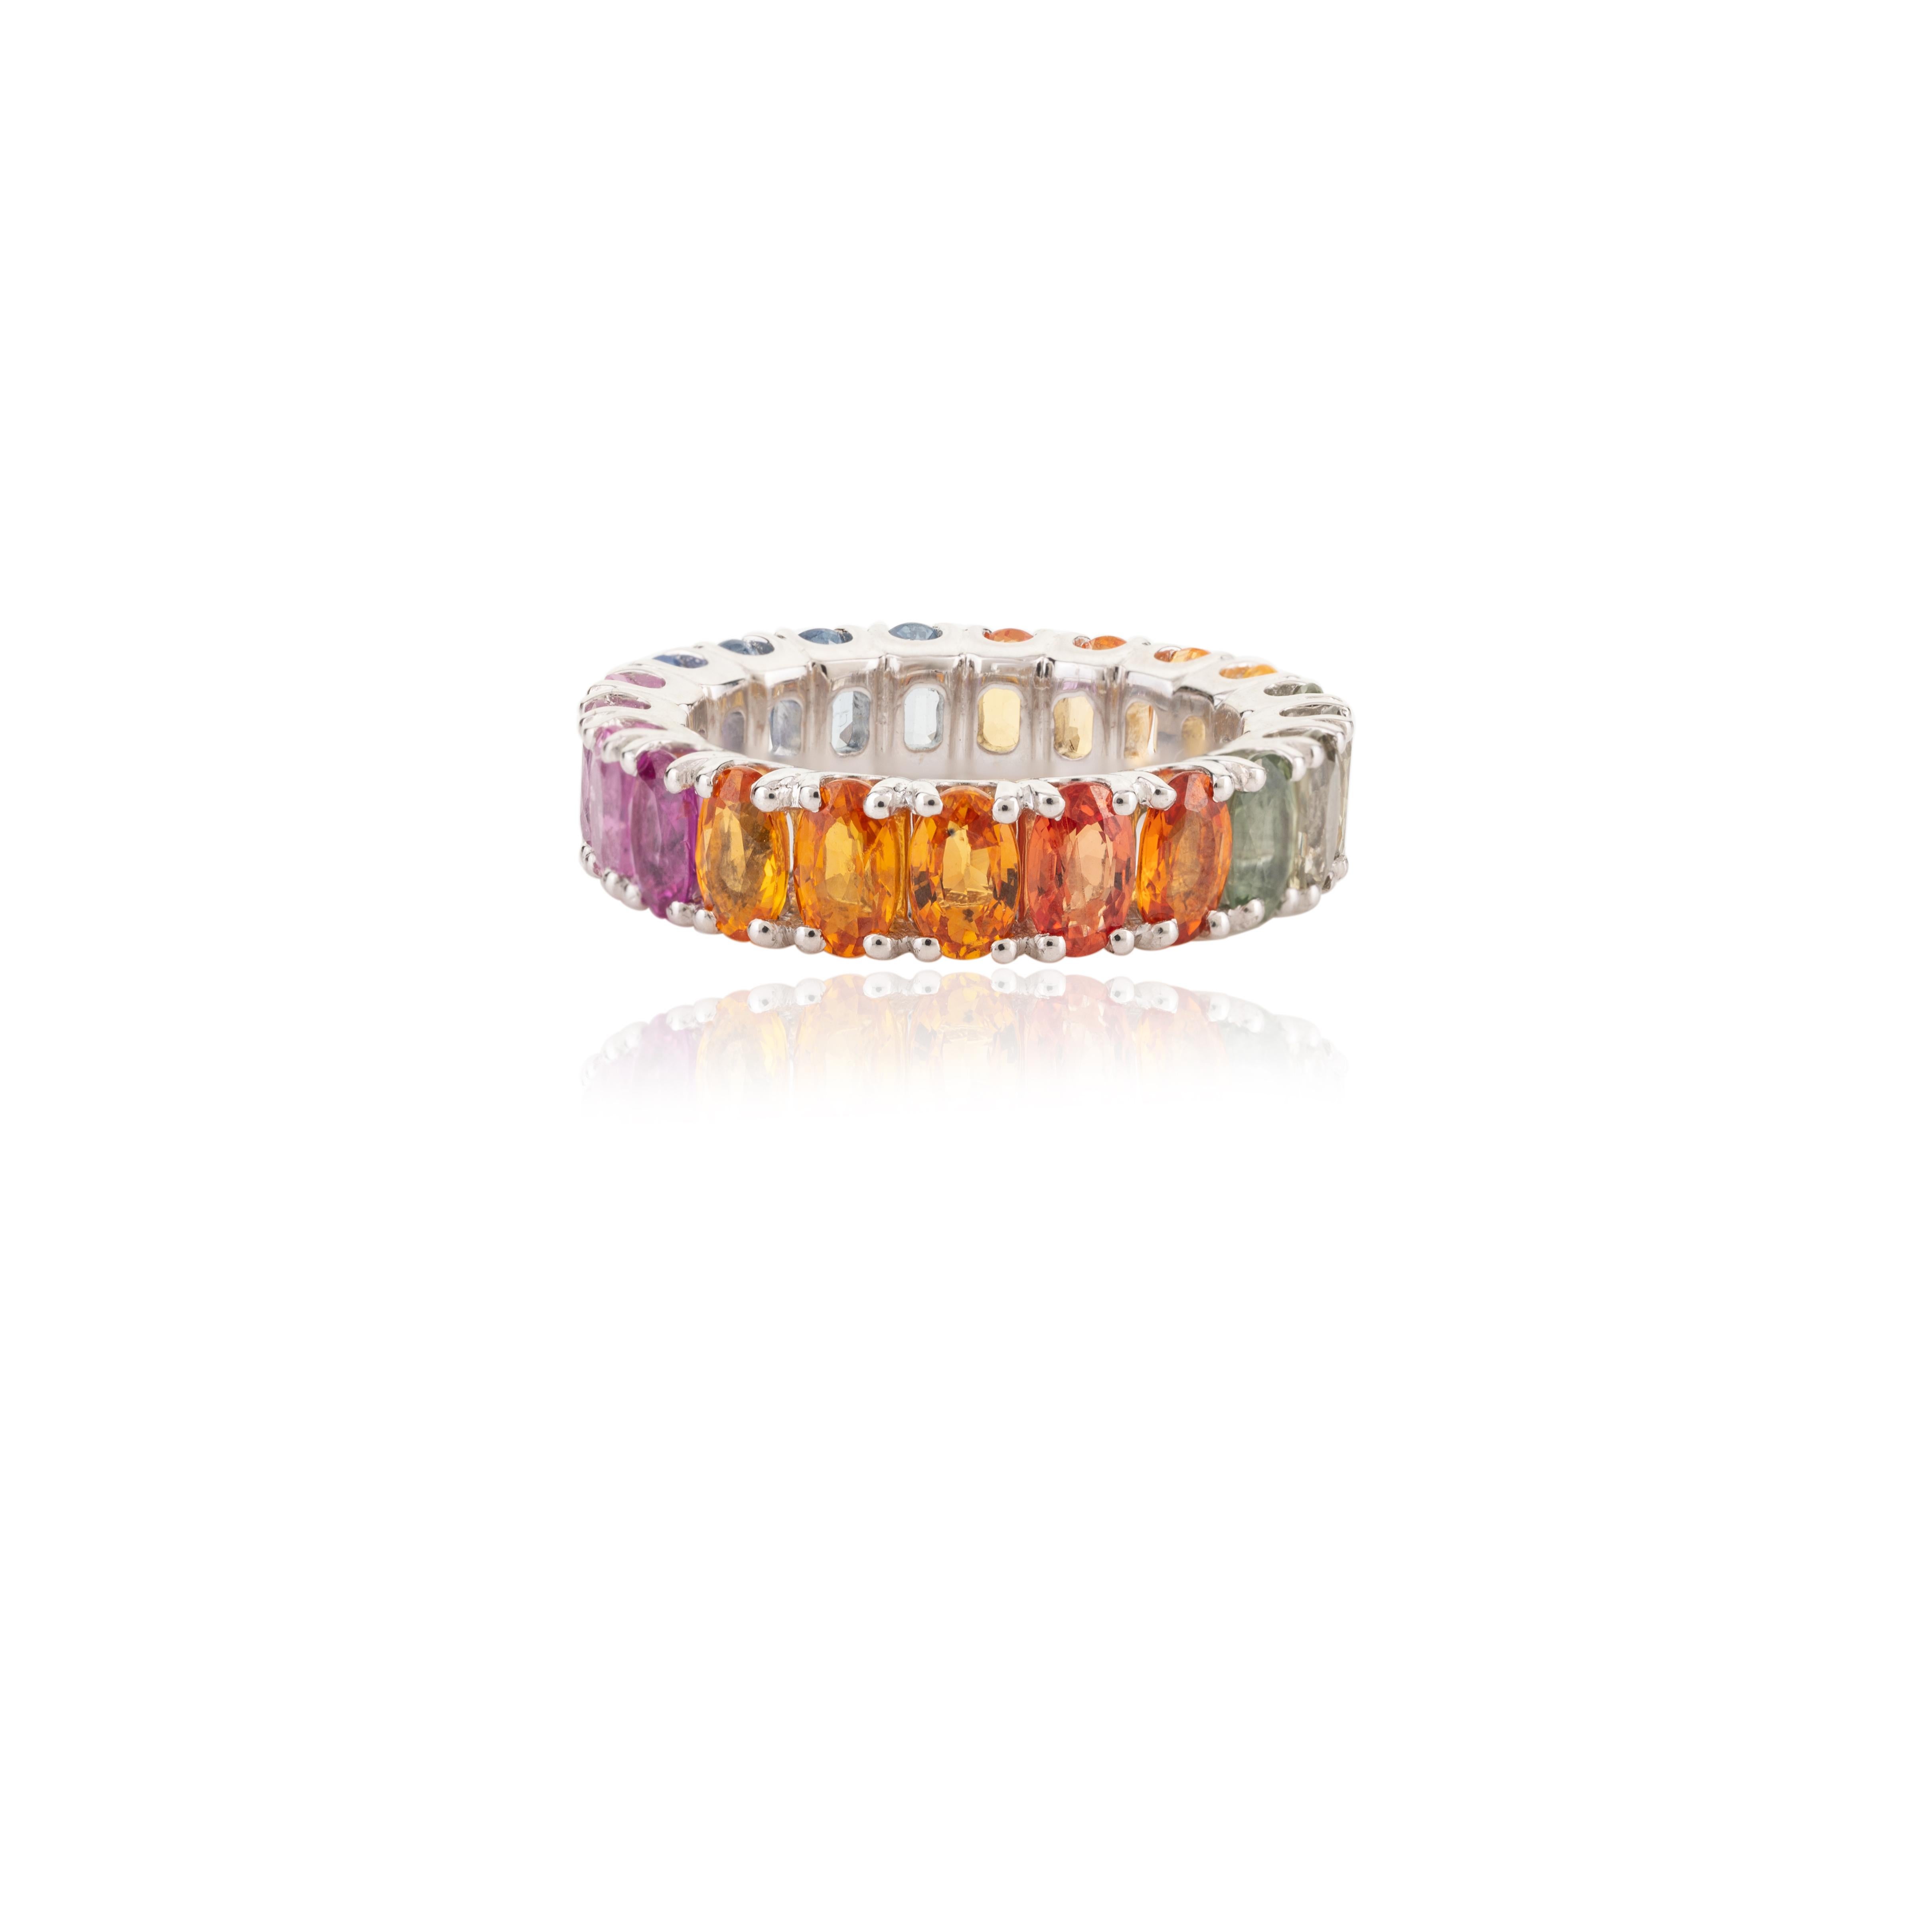 For Sale:  18 Karat White Gold 6.54 Carat Multi Colored Sapphire Eternity Band Ring 5